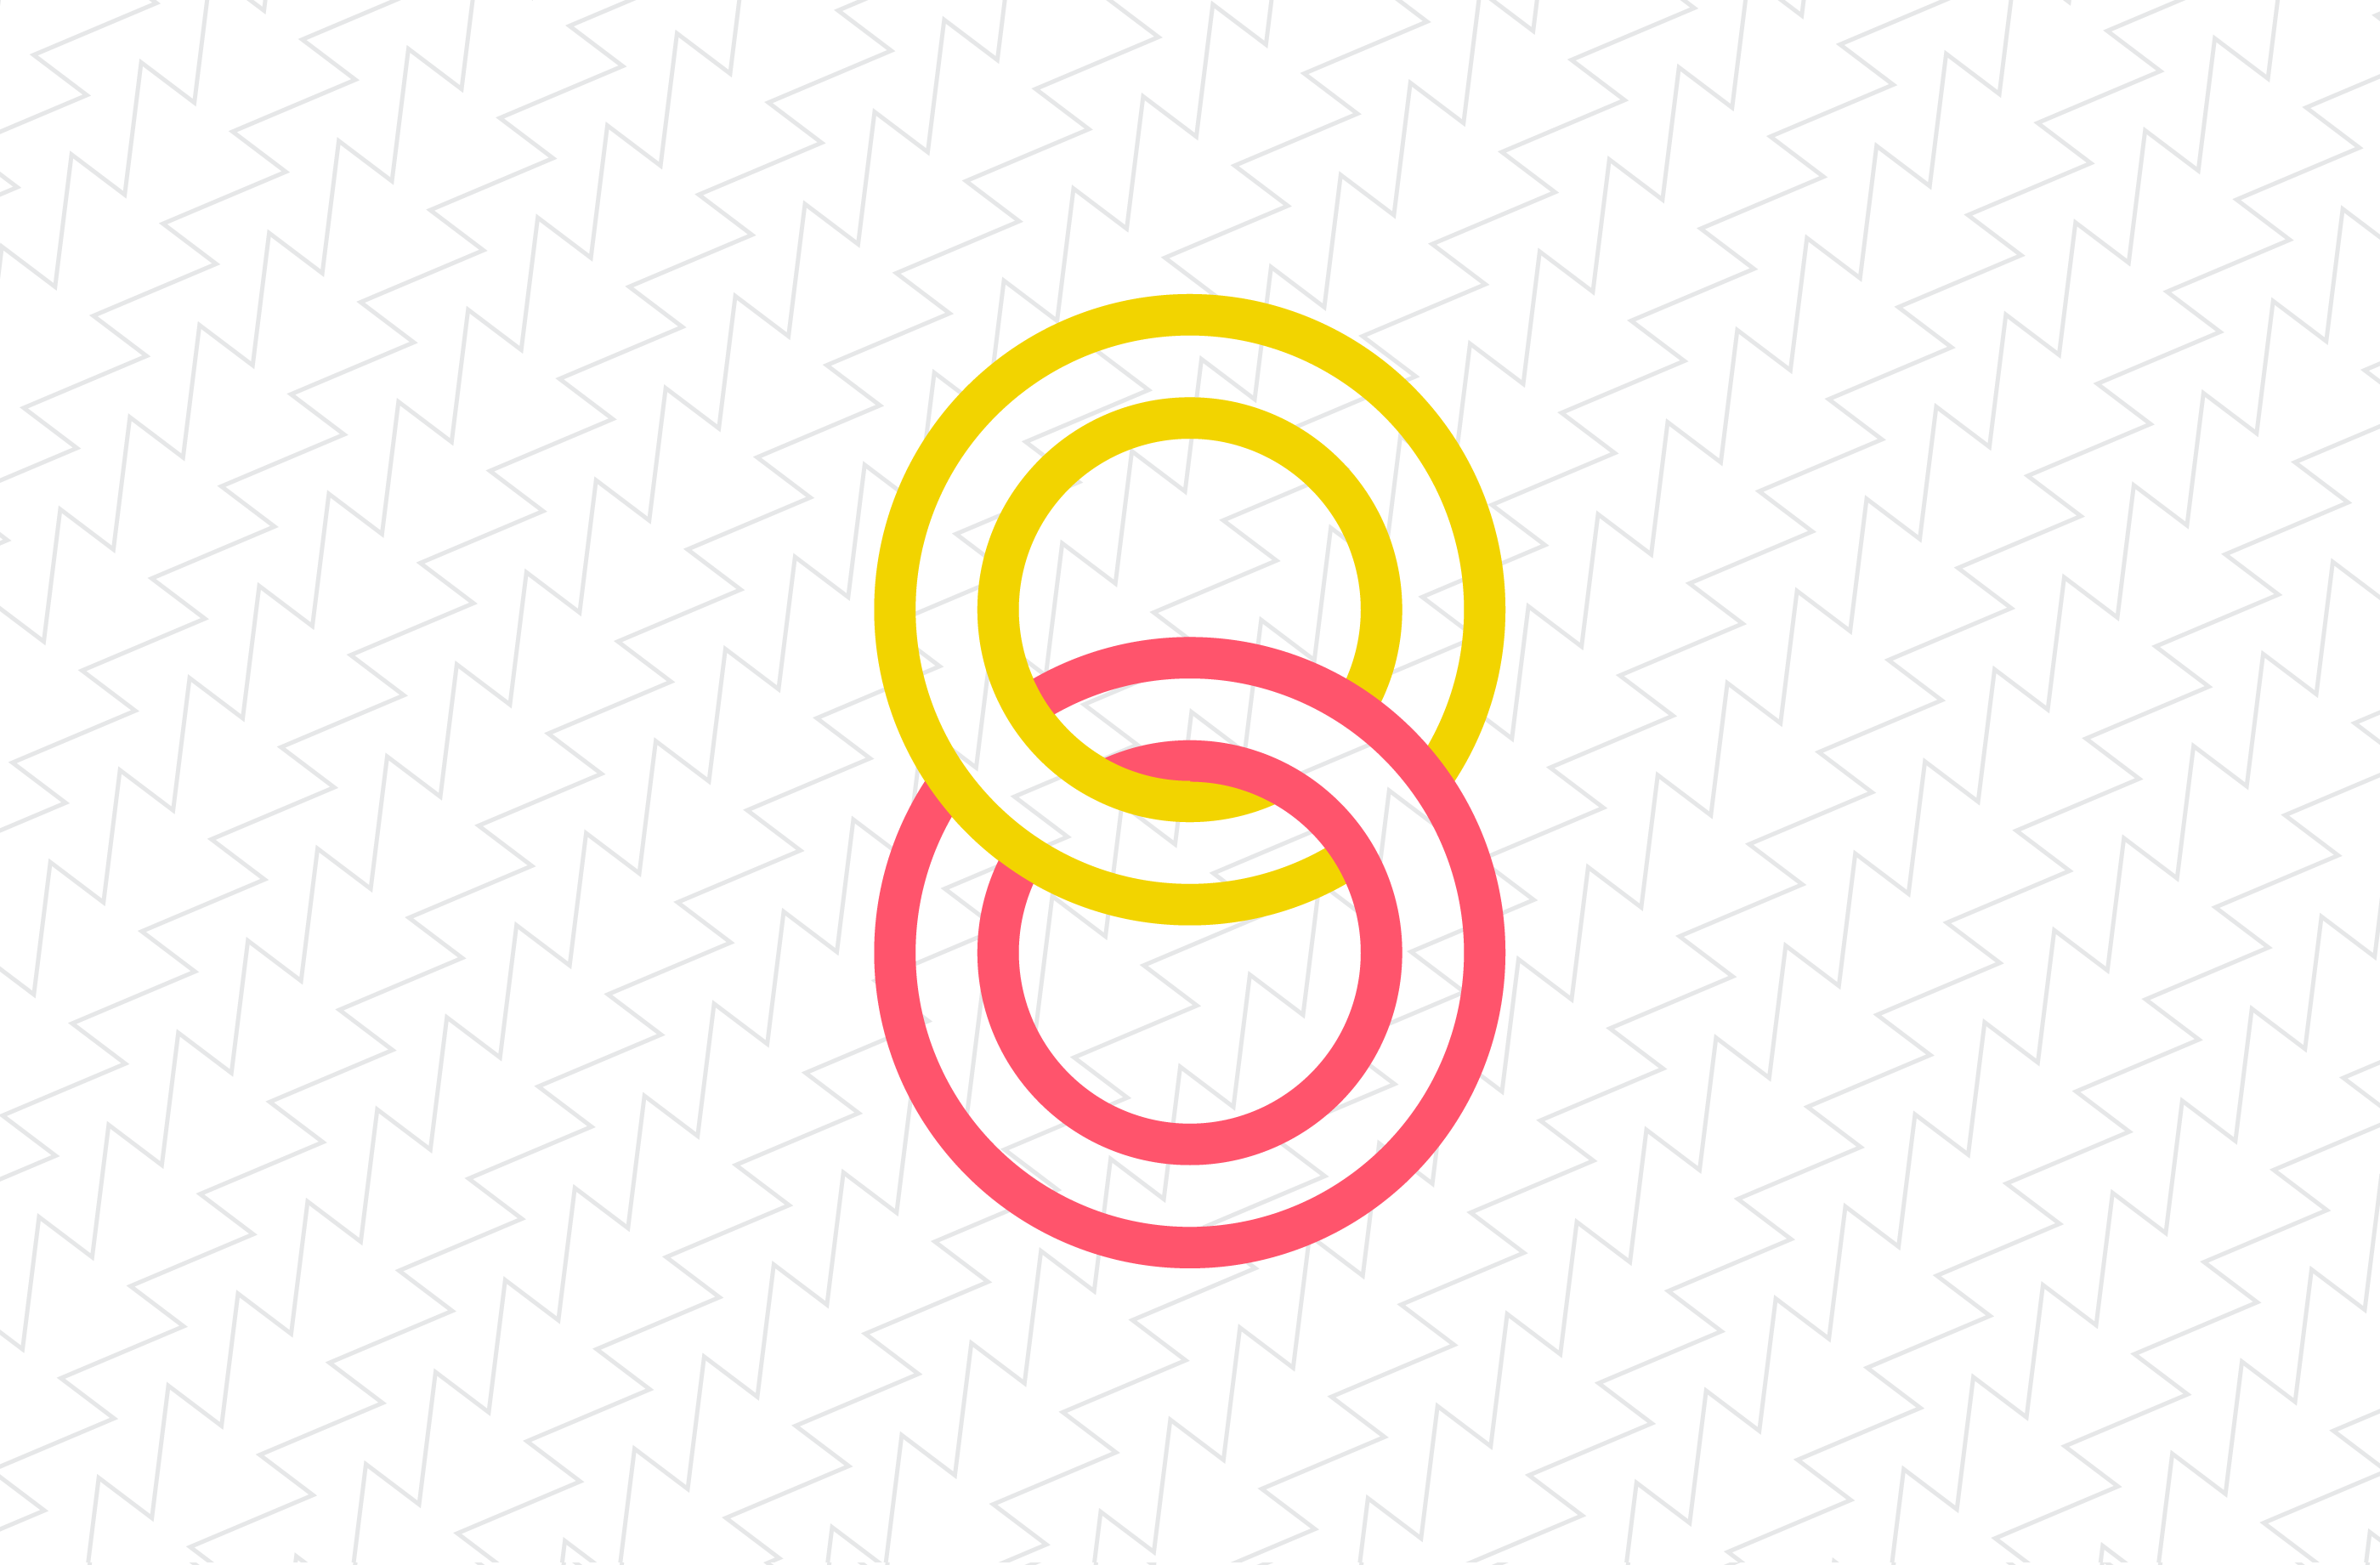 Marketing symbol design with red and yellow interlinking circles.